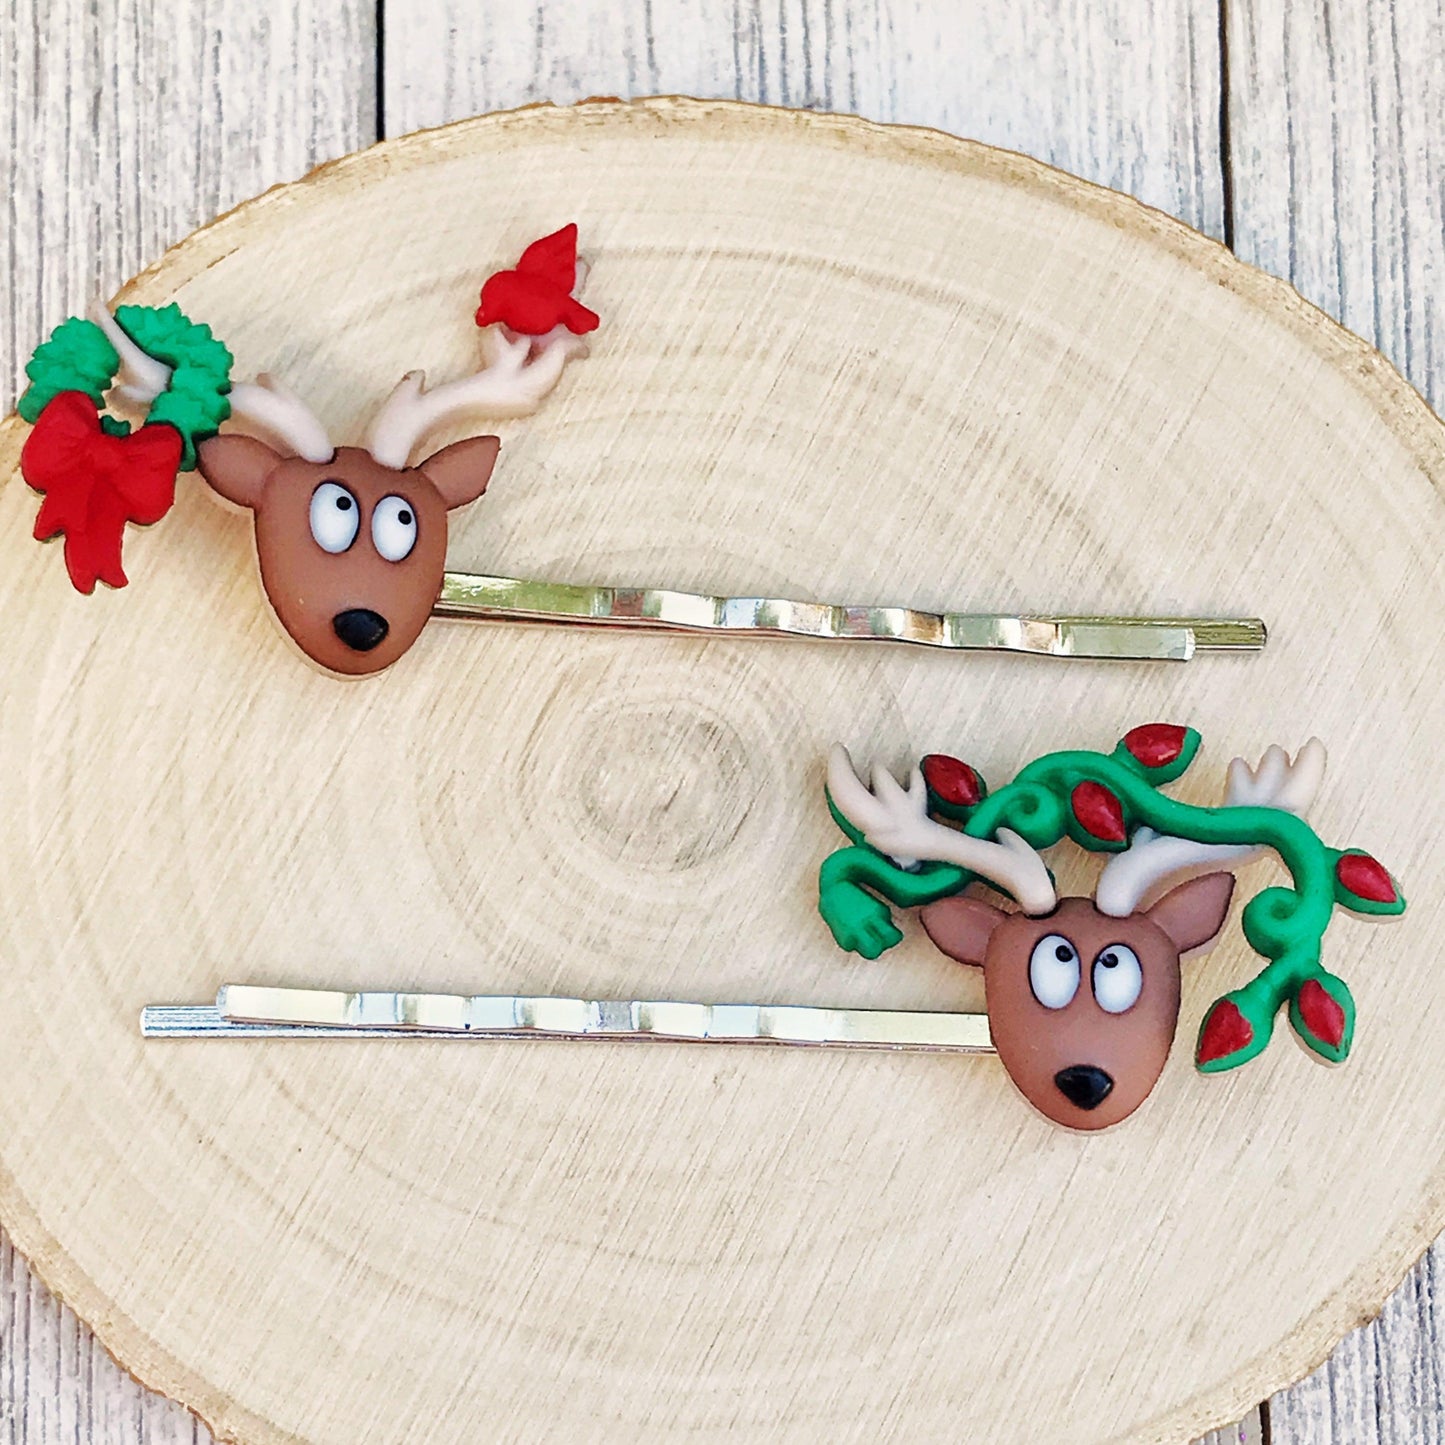 Reindeer with Wreath, Bird, & Light Strand Christmas Hair Pins: Whimsical Accessories for Festive Hairstyles